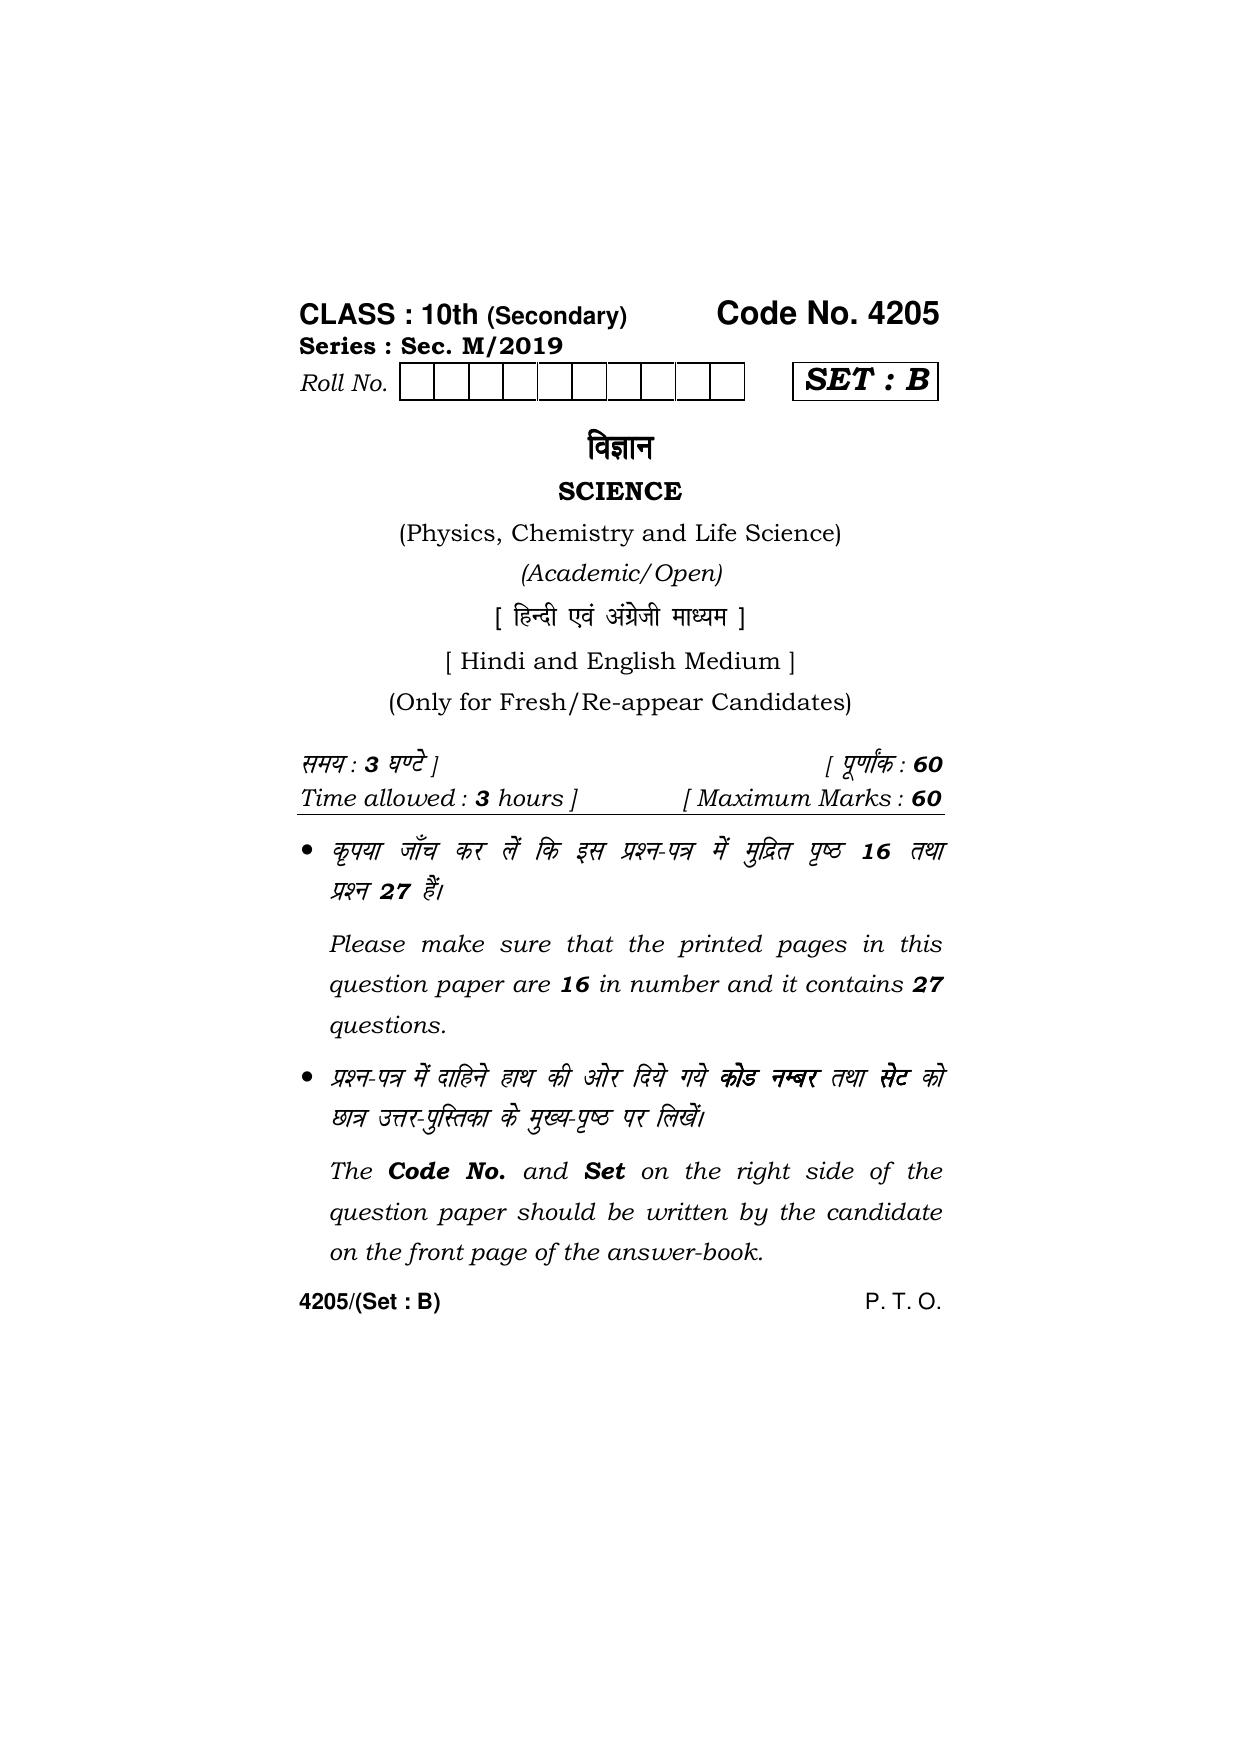 Haryana Board HBSE Class 10 Science (All Set) 2019 Question Paper - Page 17